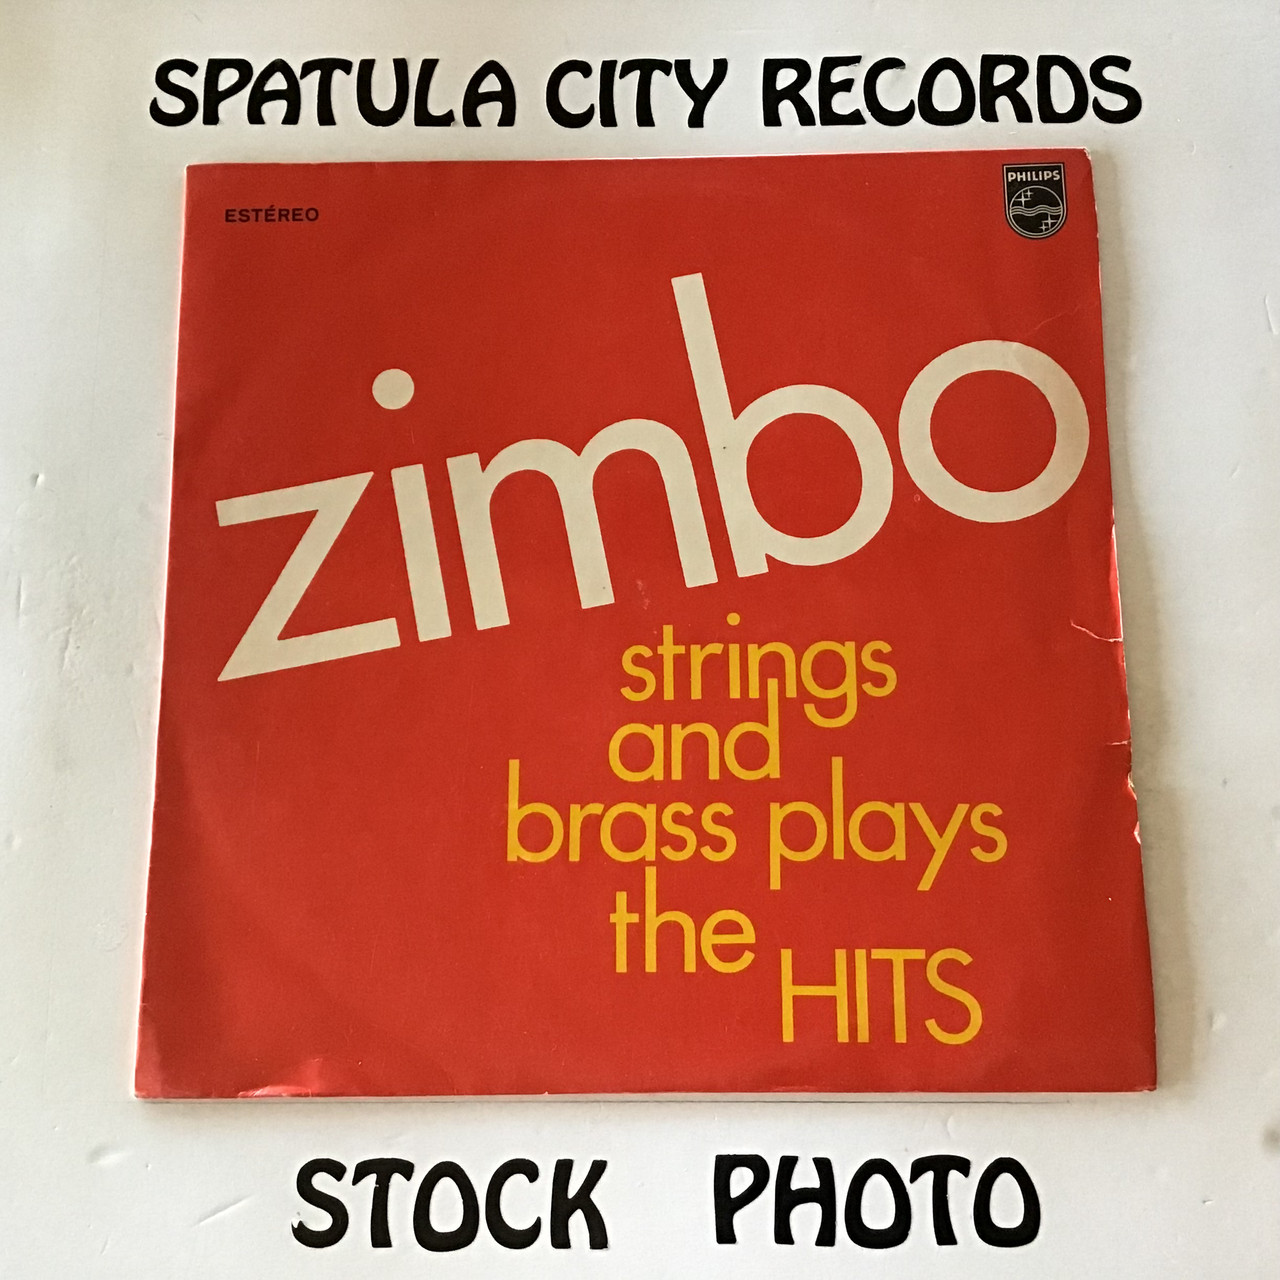 Zimbo - Strings and Brass Plays the Hits - IMPORT - vinyl record LP